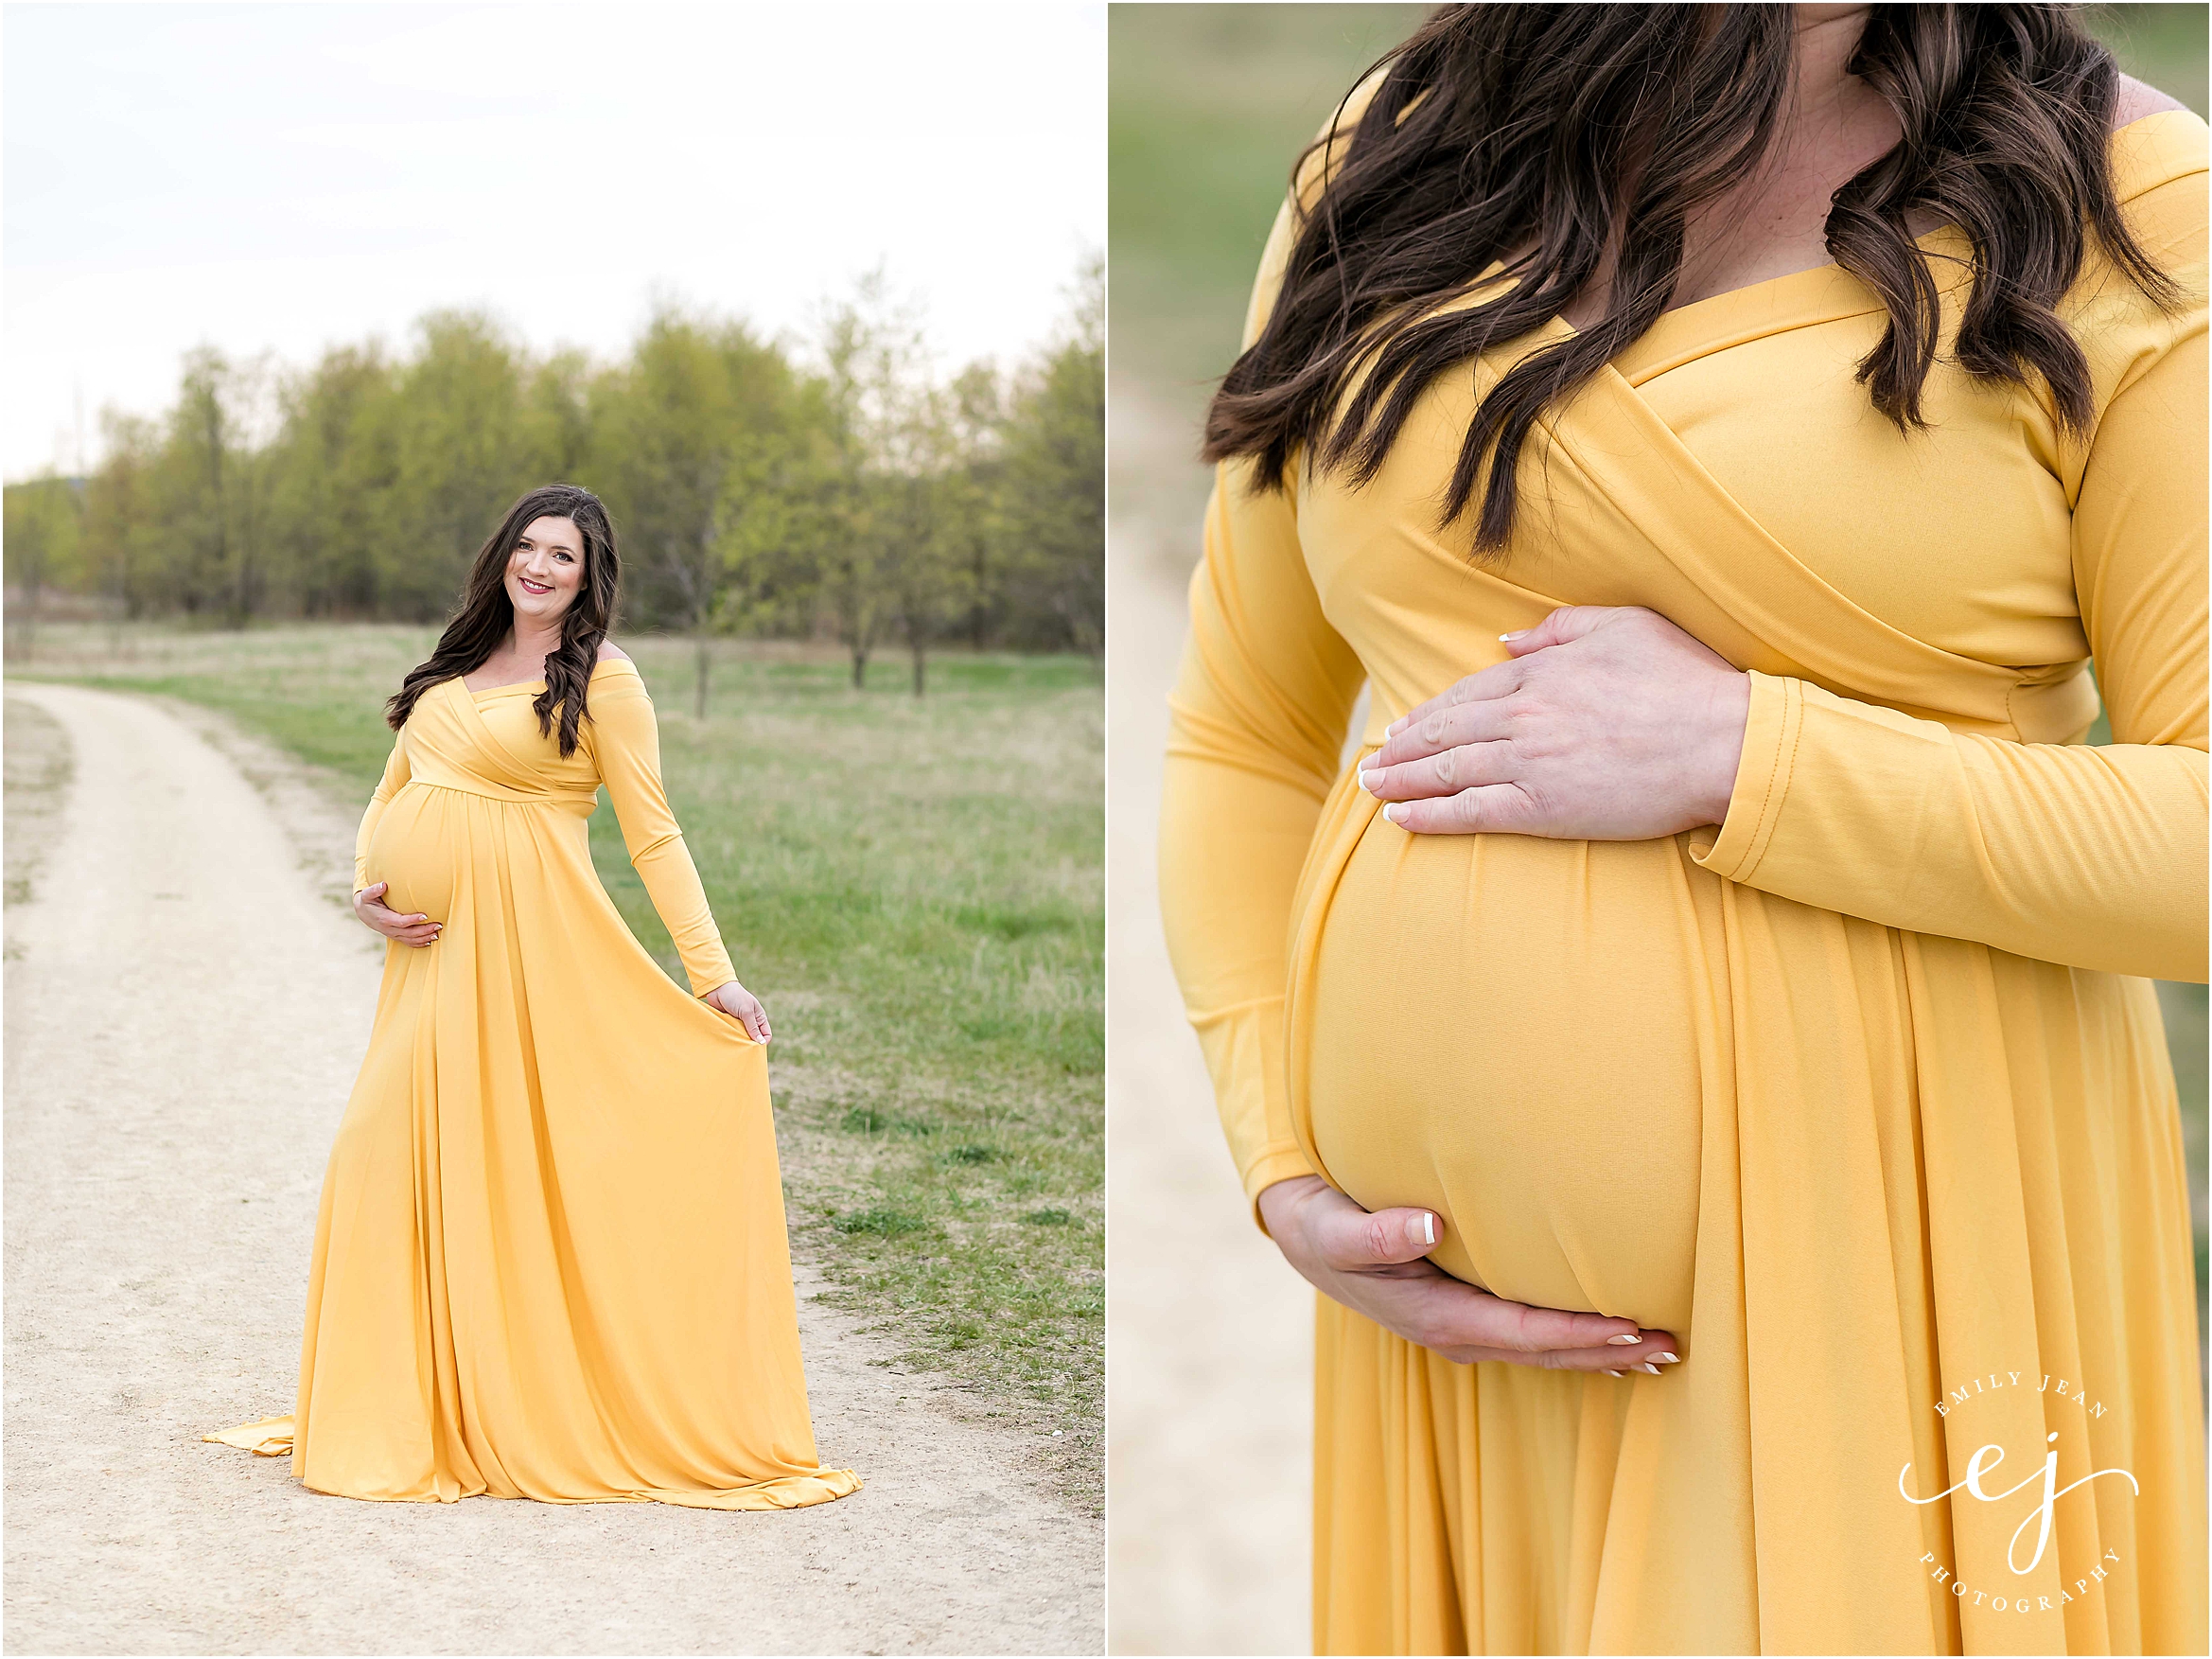 Yellow maternity dress professional photos in nature